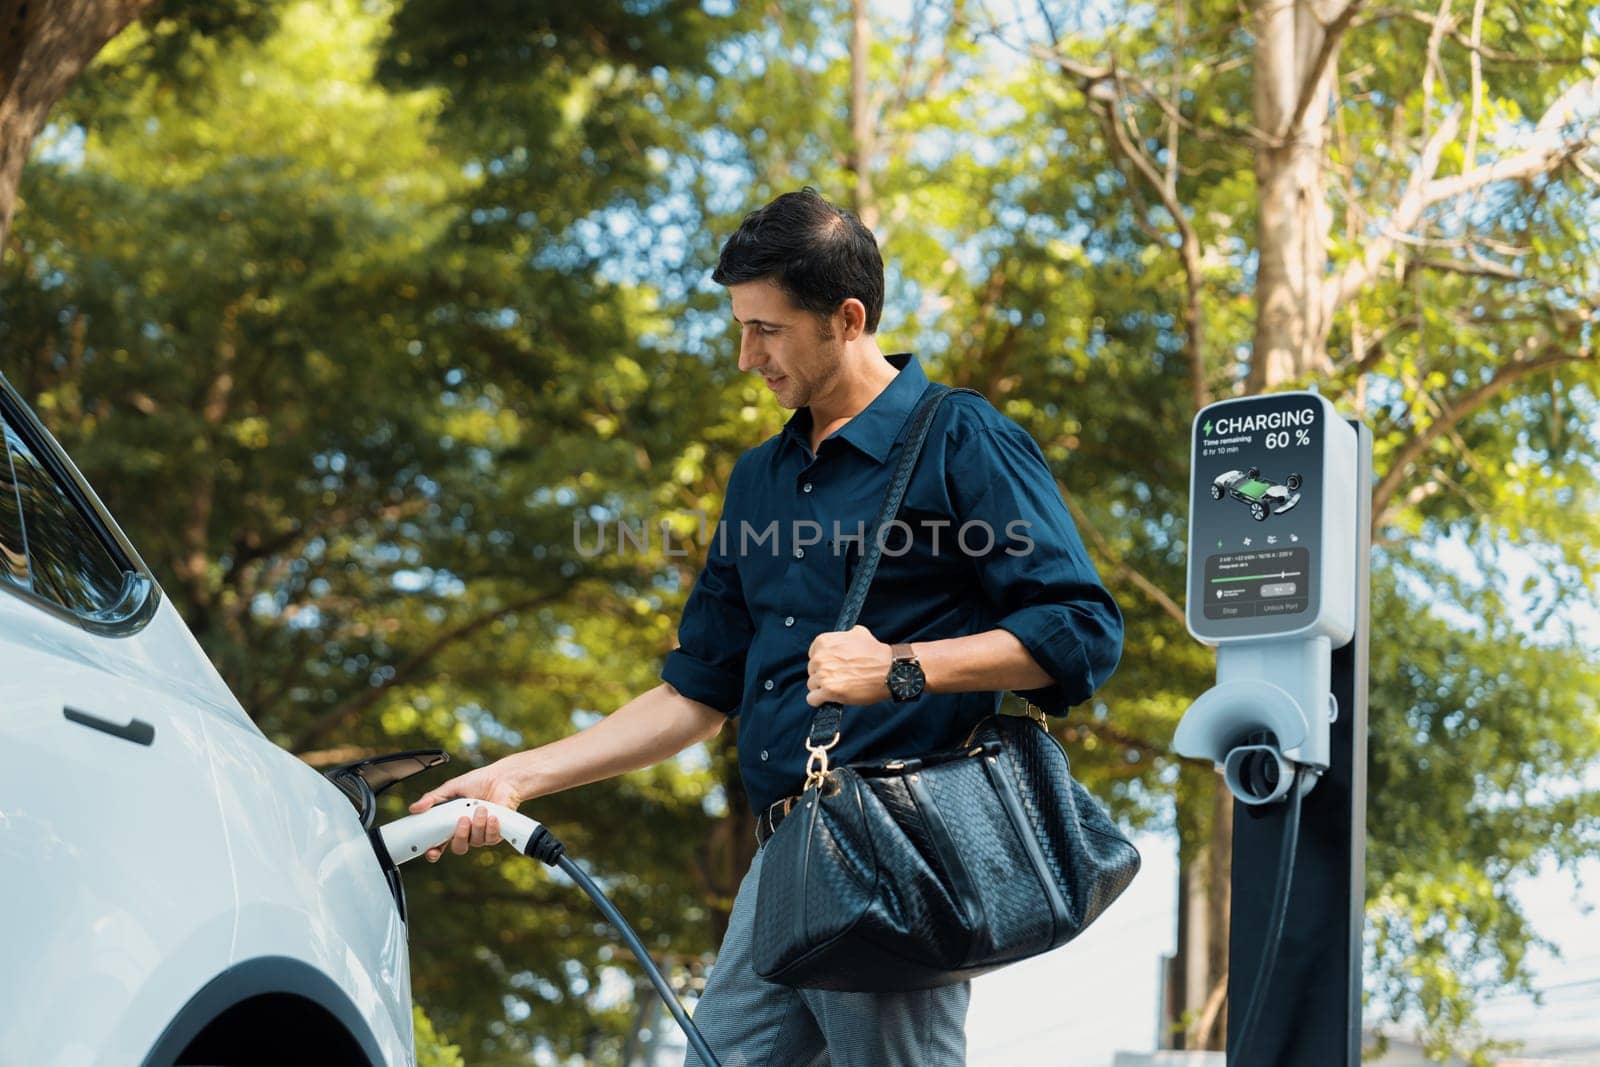 Young man recharge electric car's battery from charging station in outdoor green city park in springtime. Rechargeable EV car for sustainable environmental friendly urban travel lifestyle. Expedient